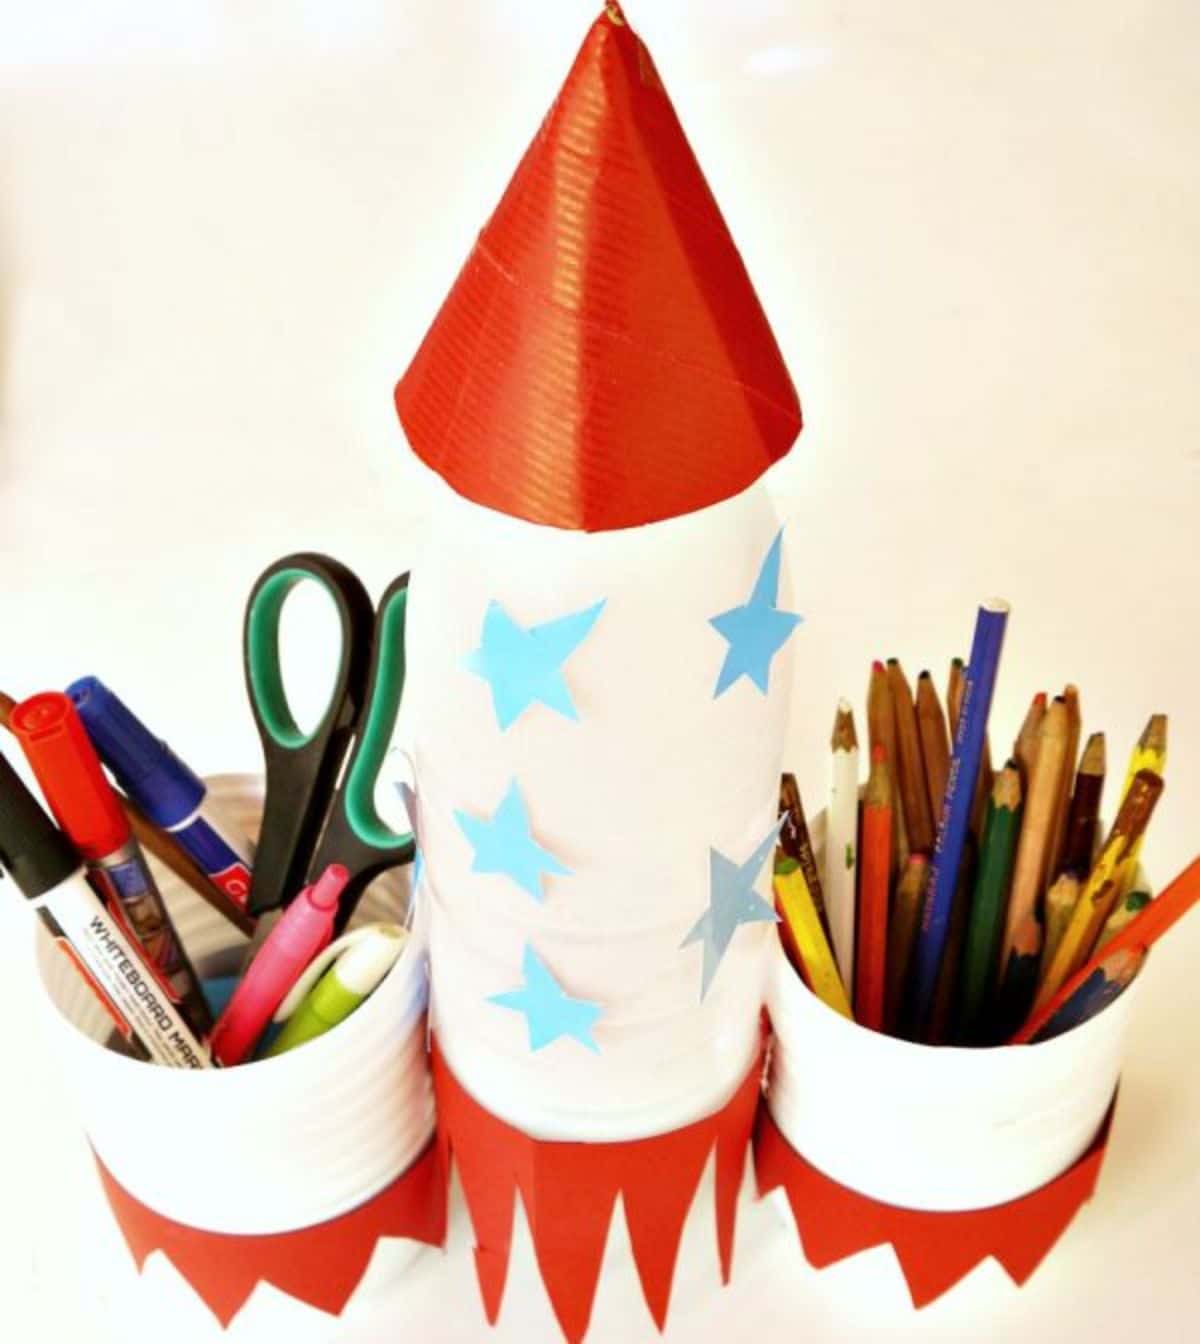 Rocket pencil holder from recycled materials.